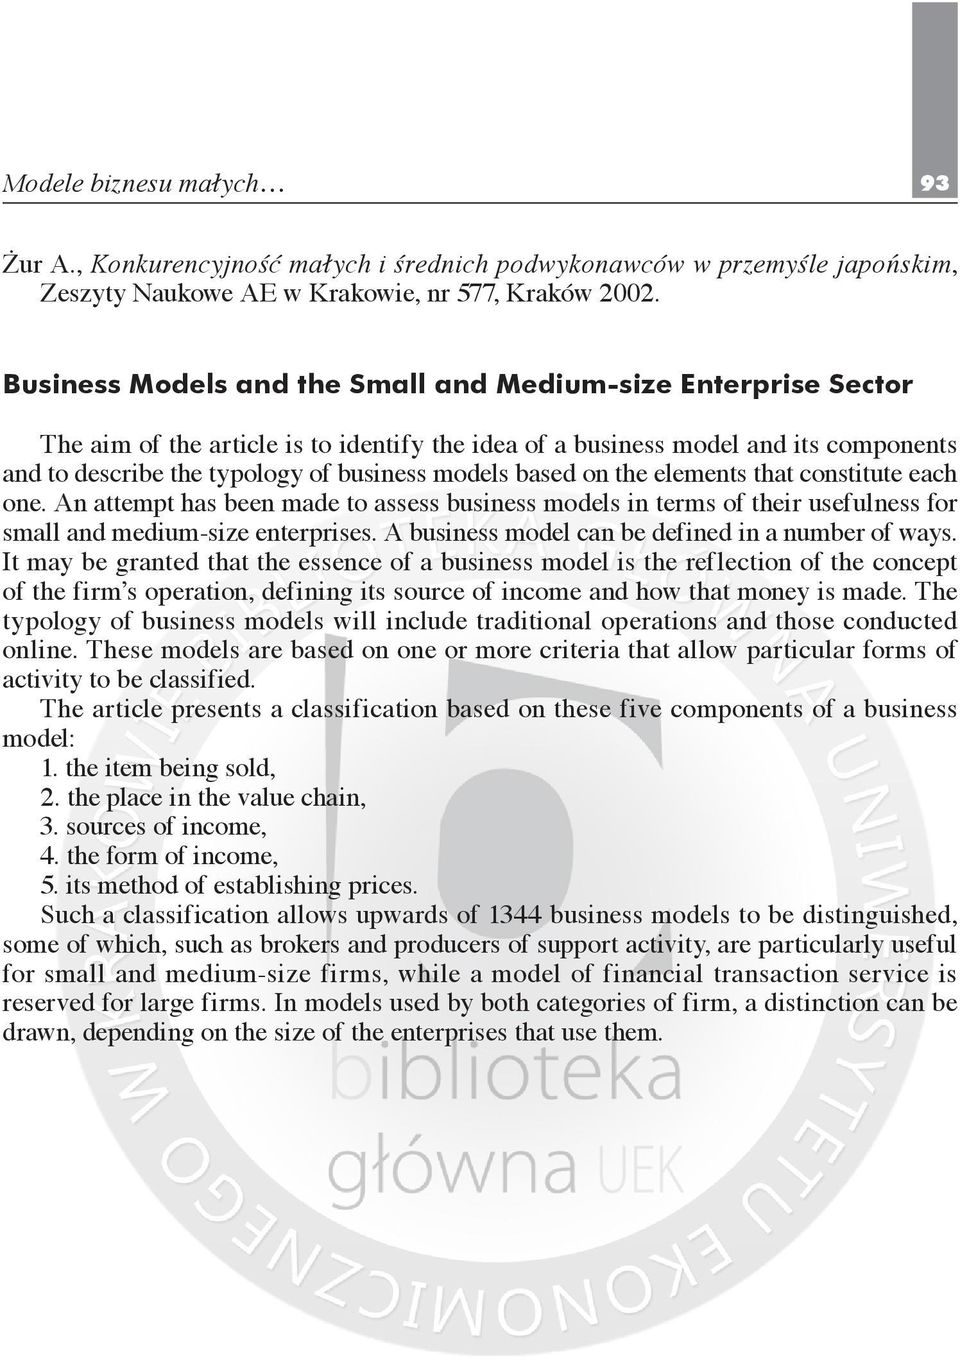 based on the elements that constitute each one. An attempt has been made to assess business models in terms of their usefulness for small and medium-size enterprises.